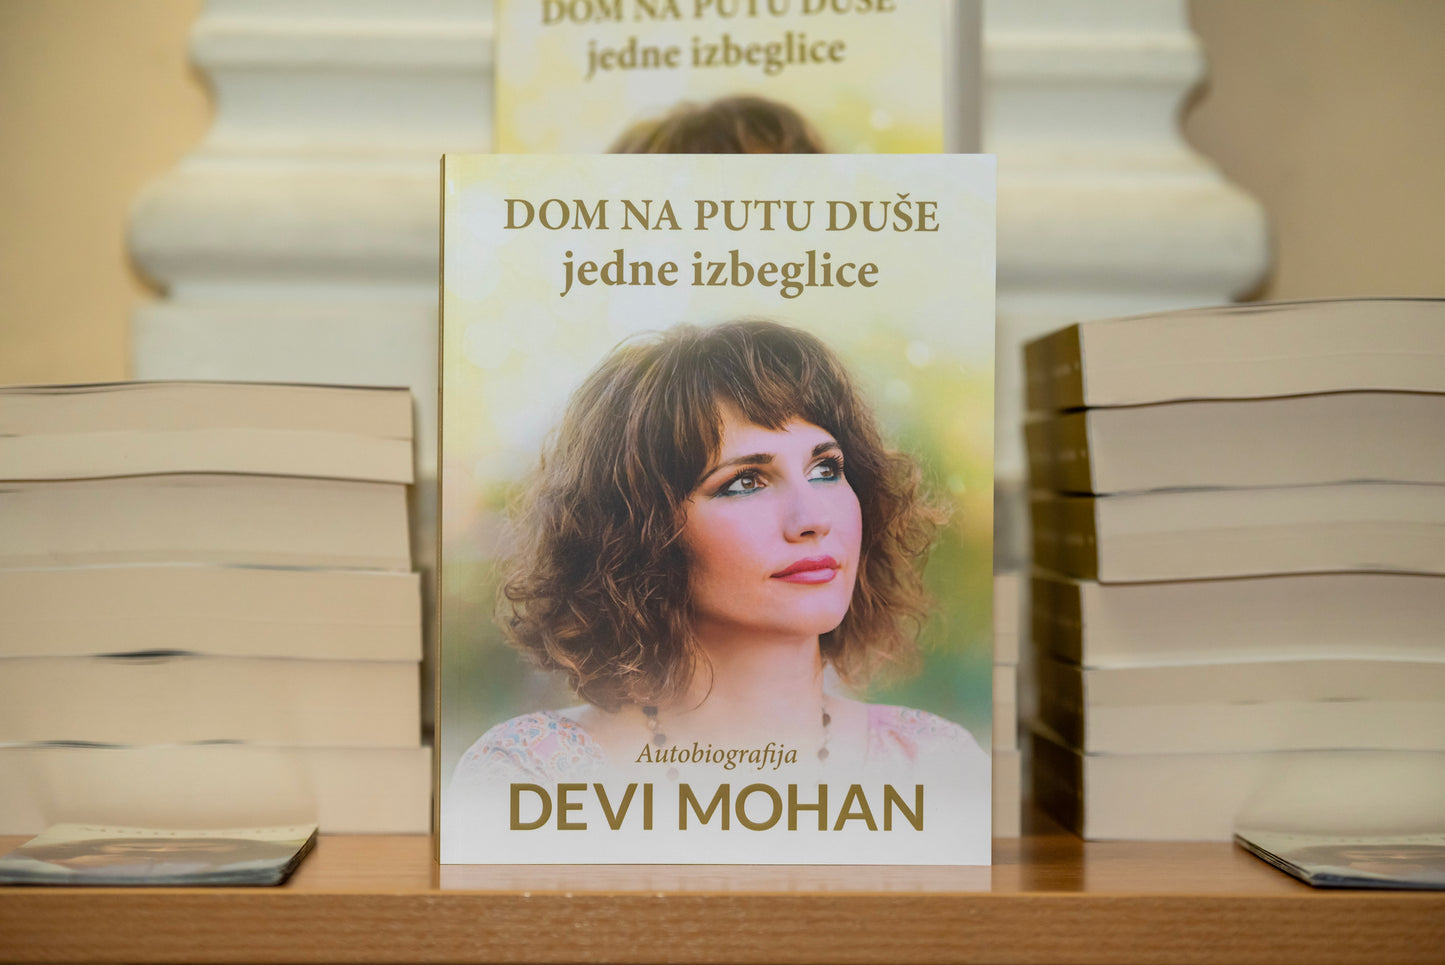 HOME FOR A REFUGEE: An Autobiography by Devi Mohan